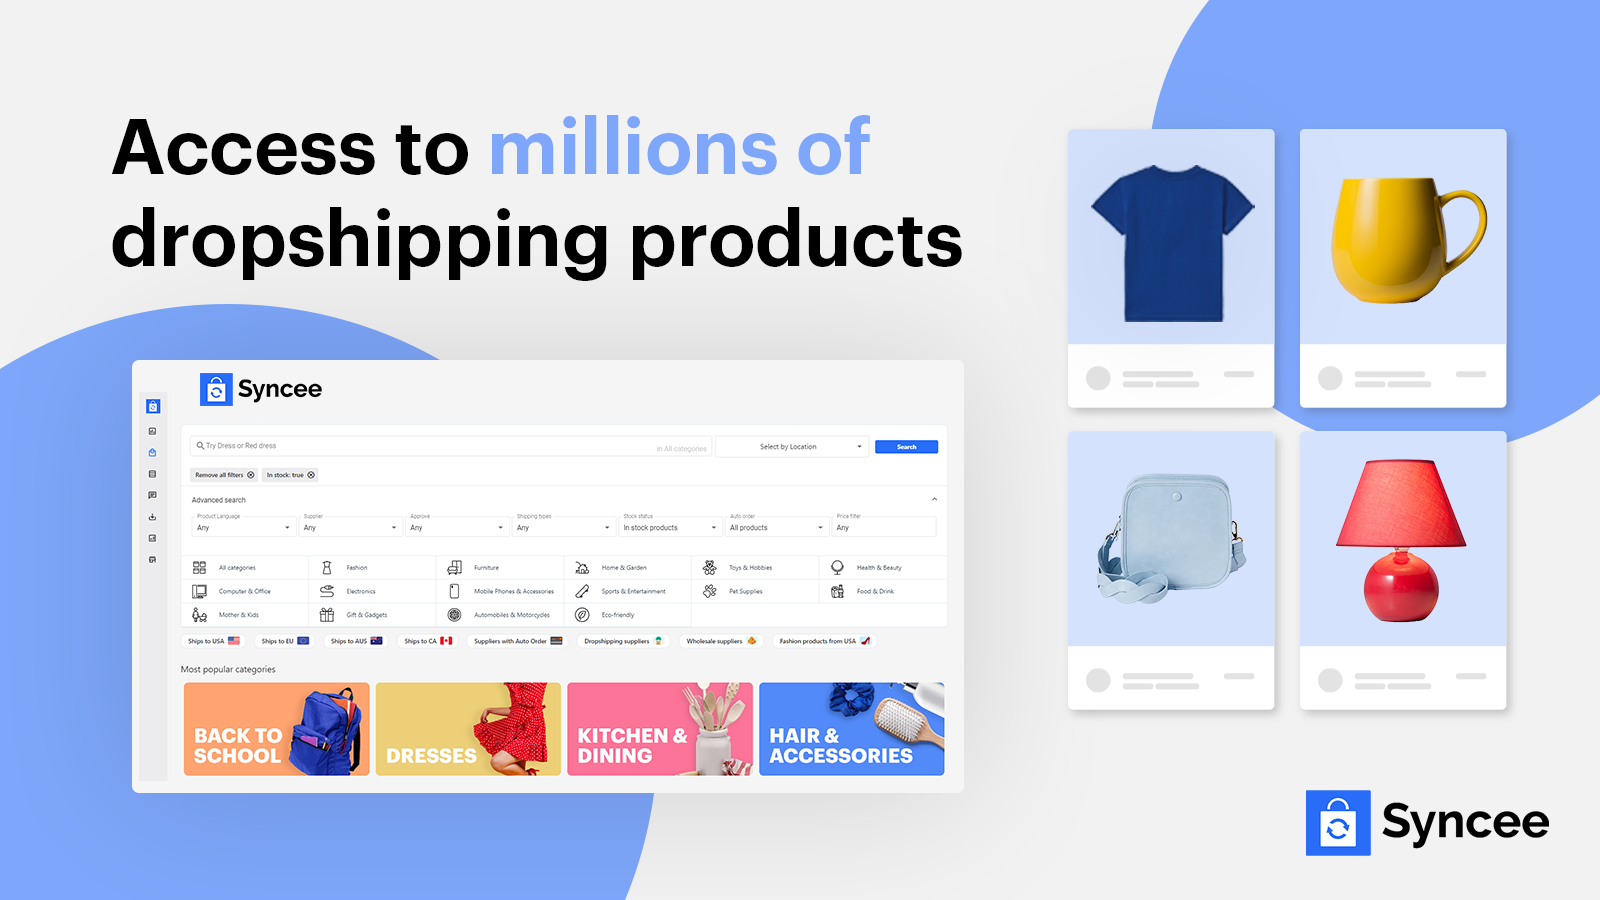 Access to millions of dropshipping products